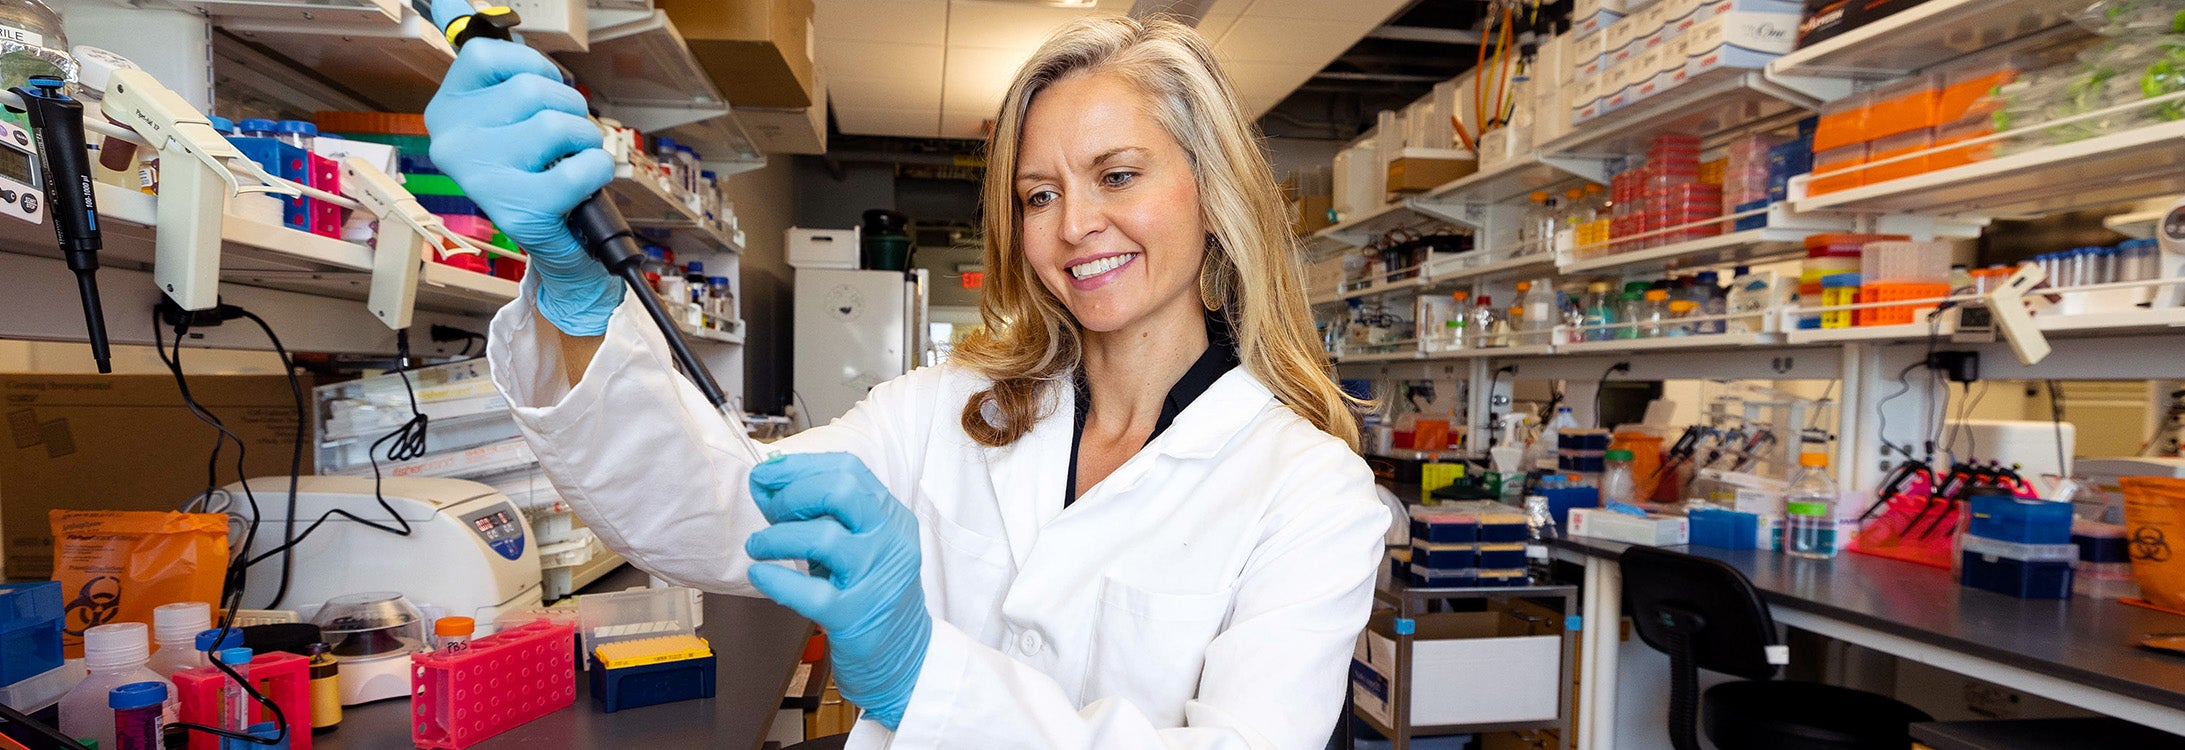 ECU Brody School of Medicine assistant professor  Dr. Karen Litwa was named the recipient of a $1.2 million research grant from the National Science Foundation for her research into brain development. (Photos by Rhett Butler)